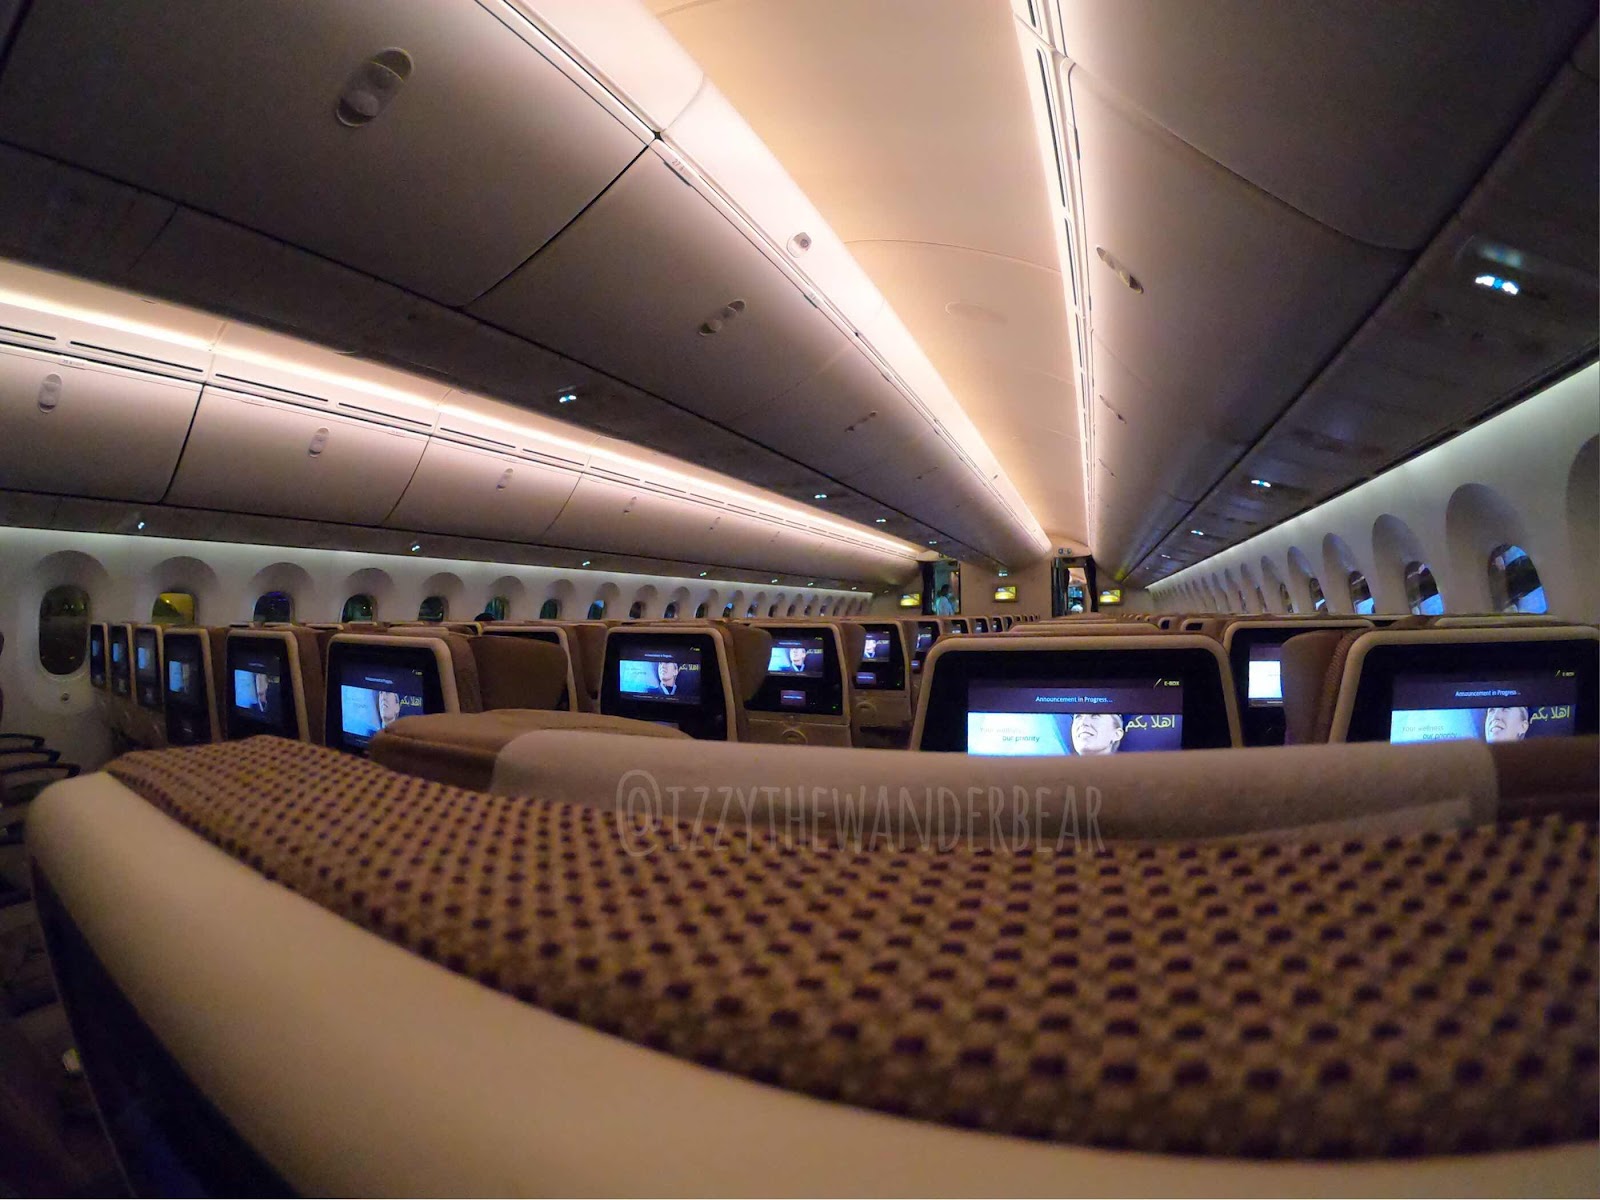 ITWB: Empty seats in Etihad Airlines During Pandemic